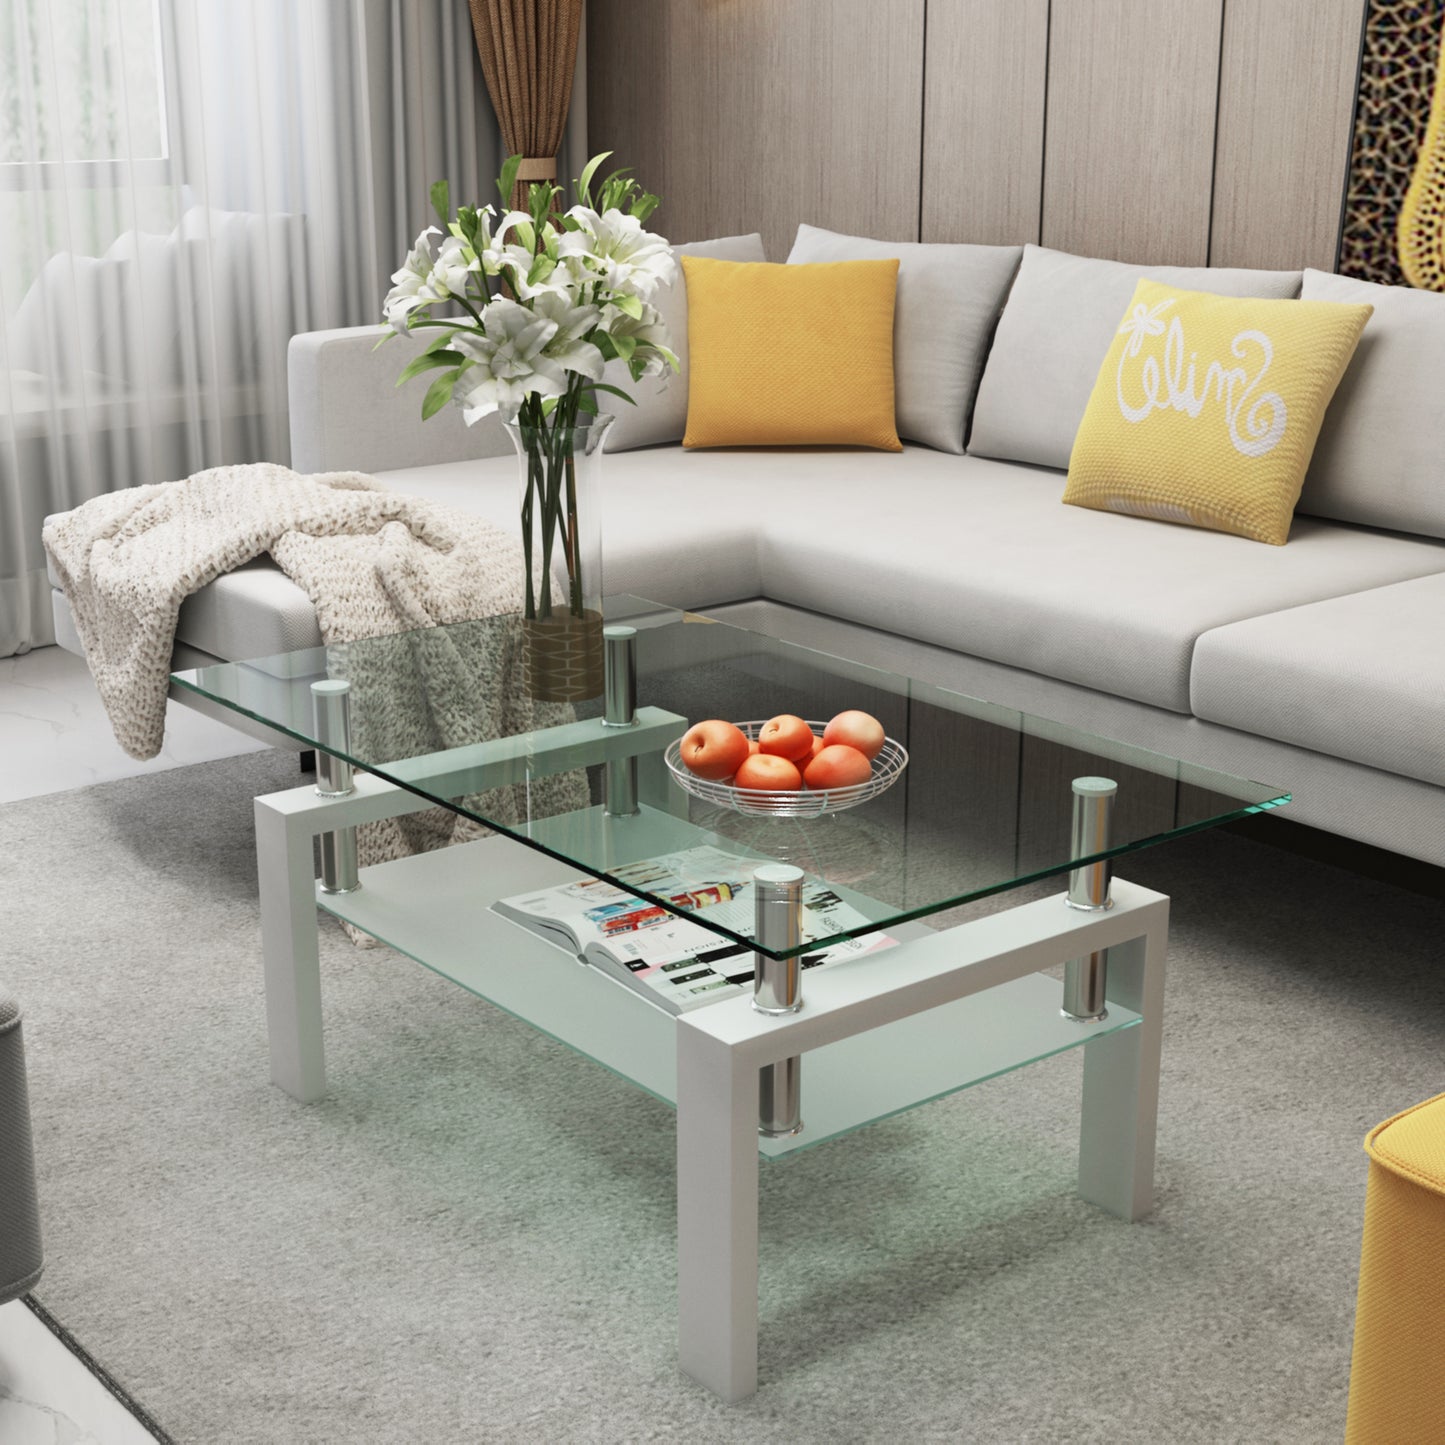 White Legs and Clear Glass Coffee Table, Modern Side Tables for Living Room.